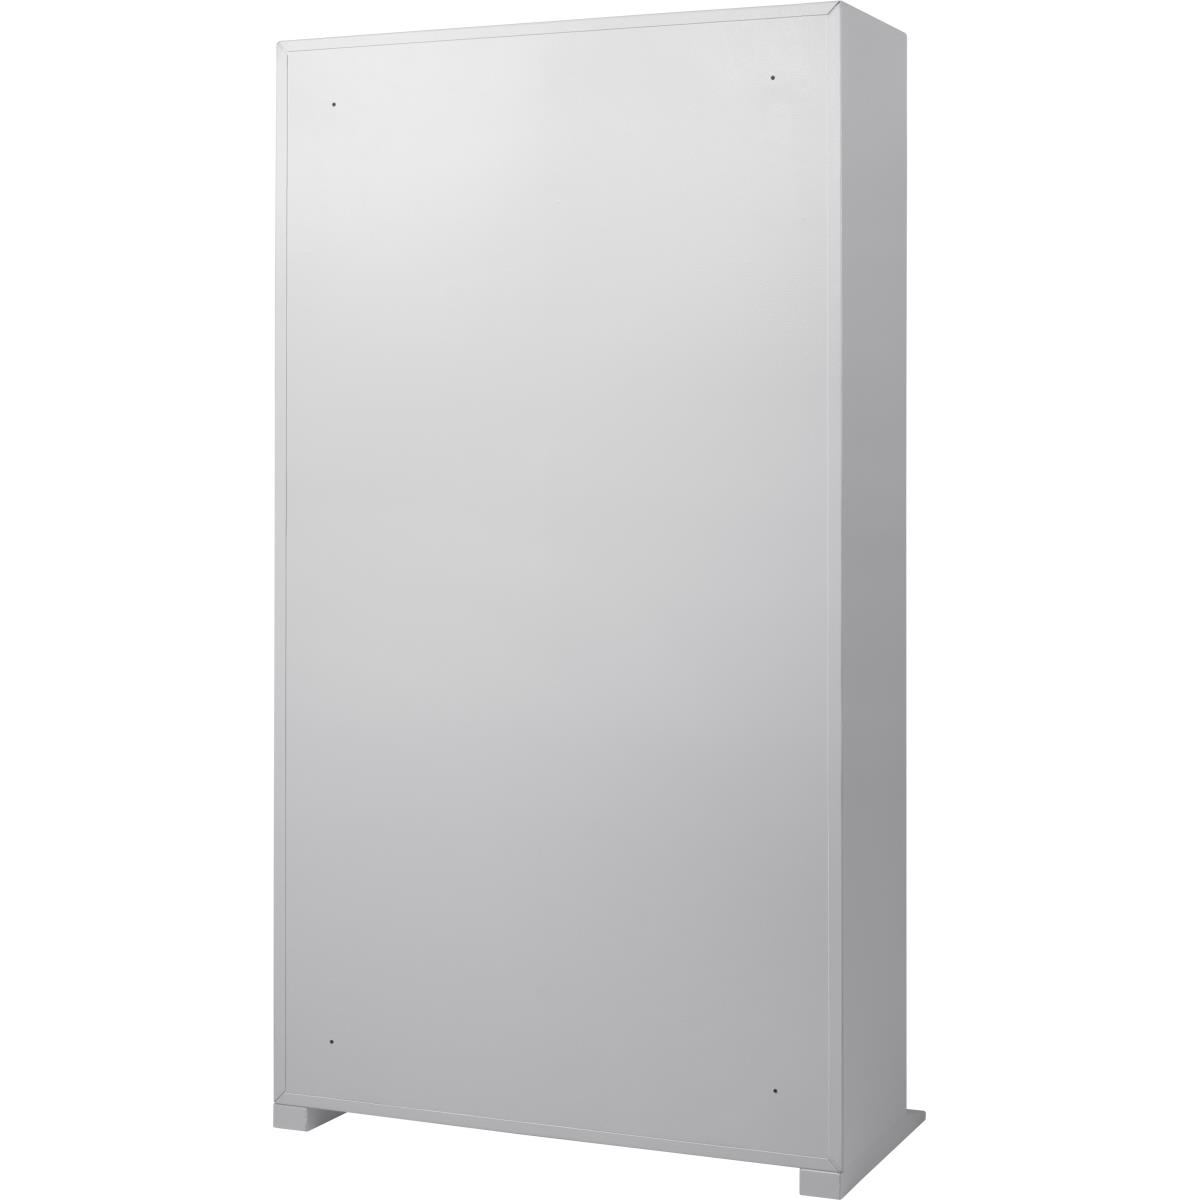 Picture of Barska CB12958 800 Position Key Cabinet with Key Lock, Gray